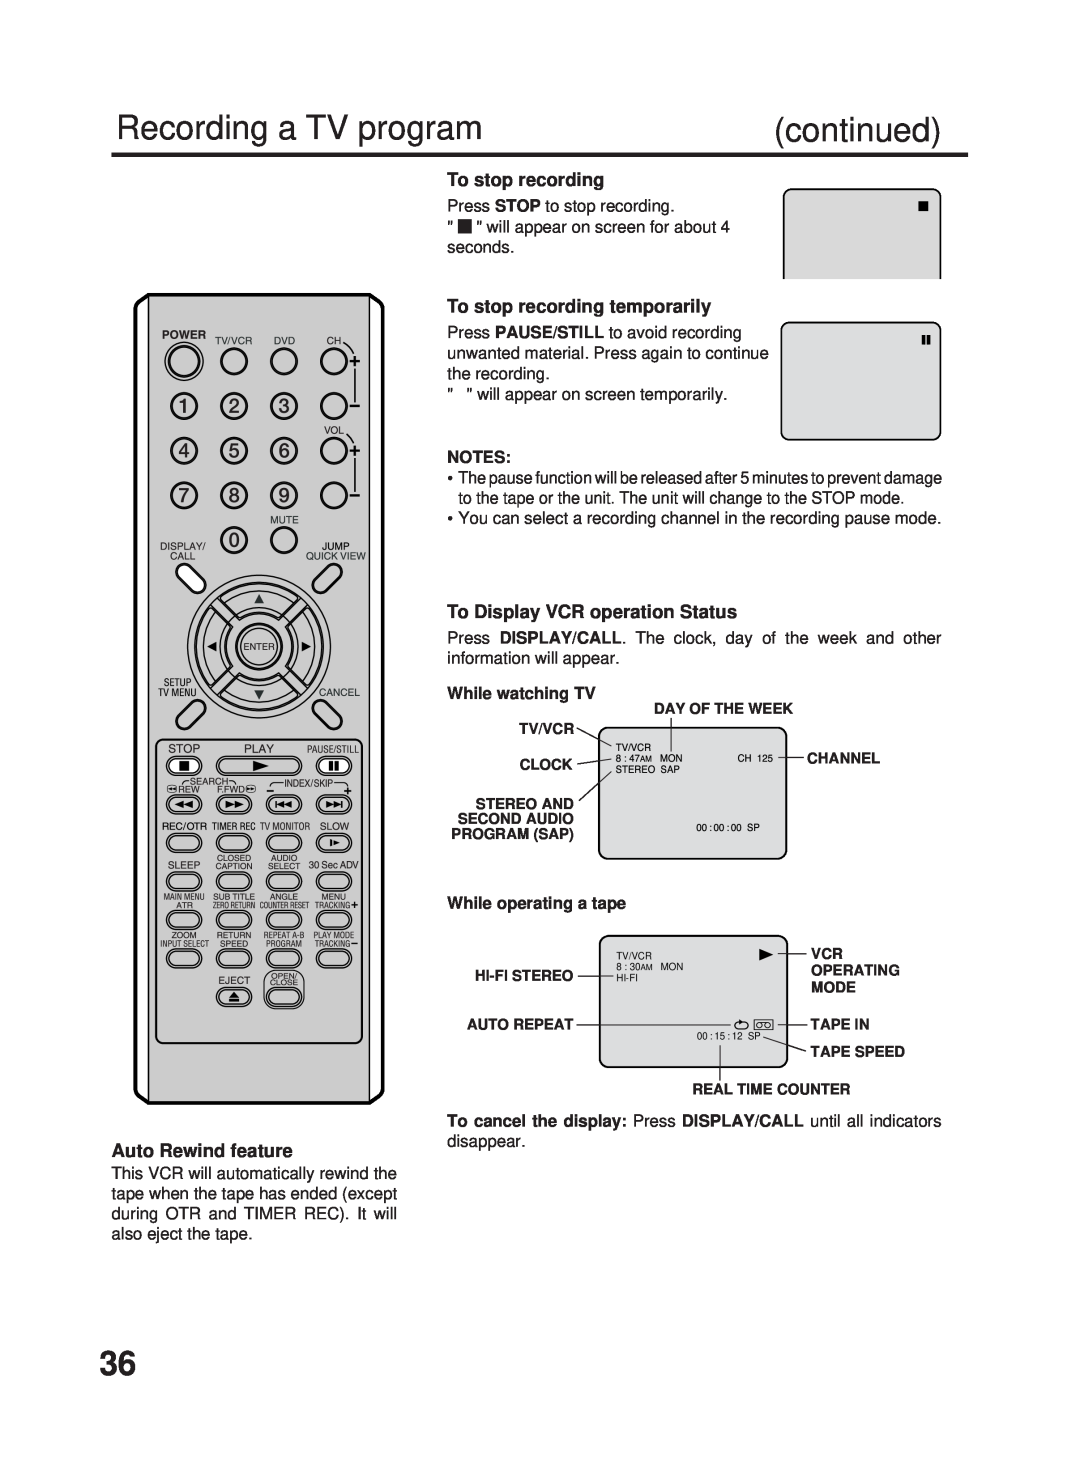 RCA 27F500TDV Recording a TV program, continued, Auto Rewind feature, To stop recording temporarily, While watching TV 